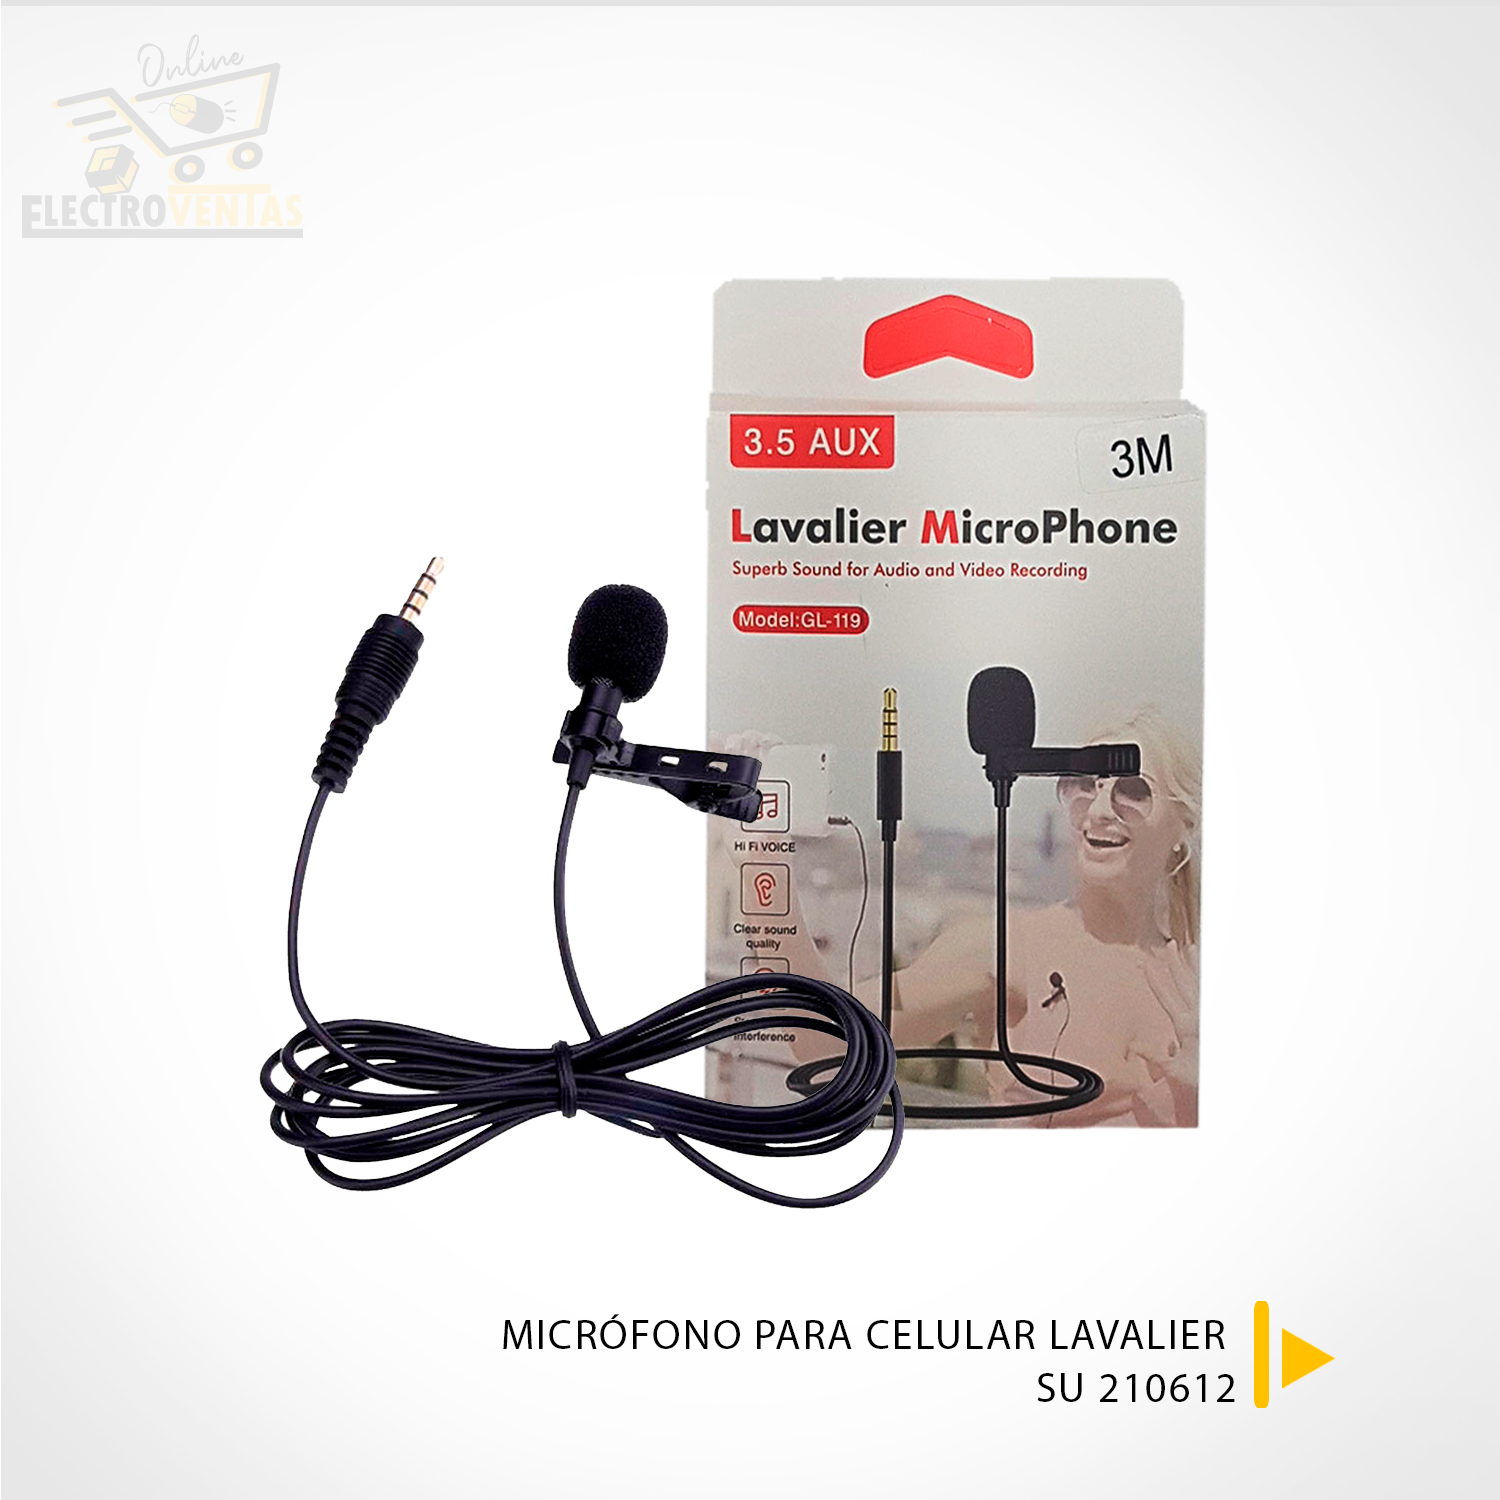 Wireless Microphone, OSA Professional Wireless Lavalier Lapel Microphone  for iPhone, Android Phone, Camera, Clip-on Plug & Play Auto-sync and Noise